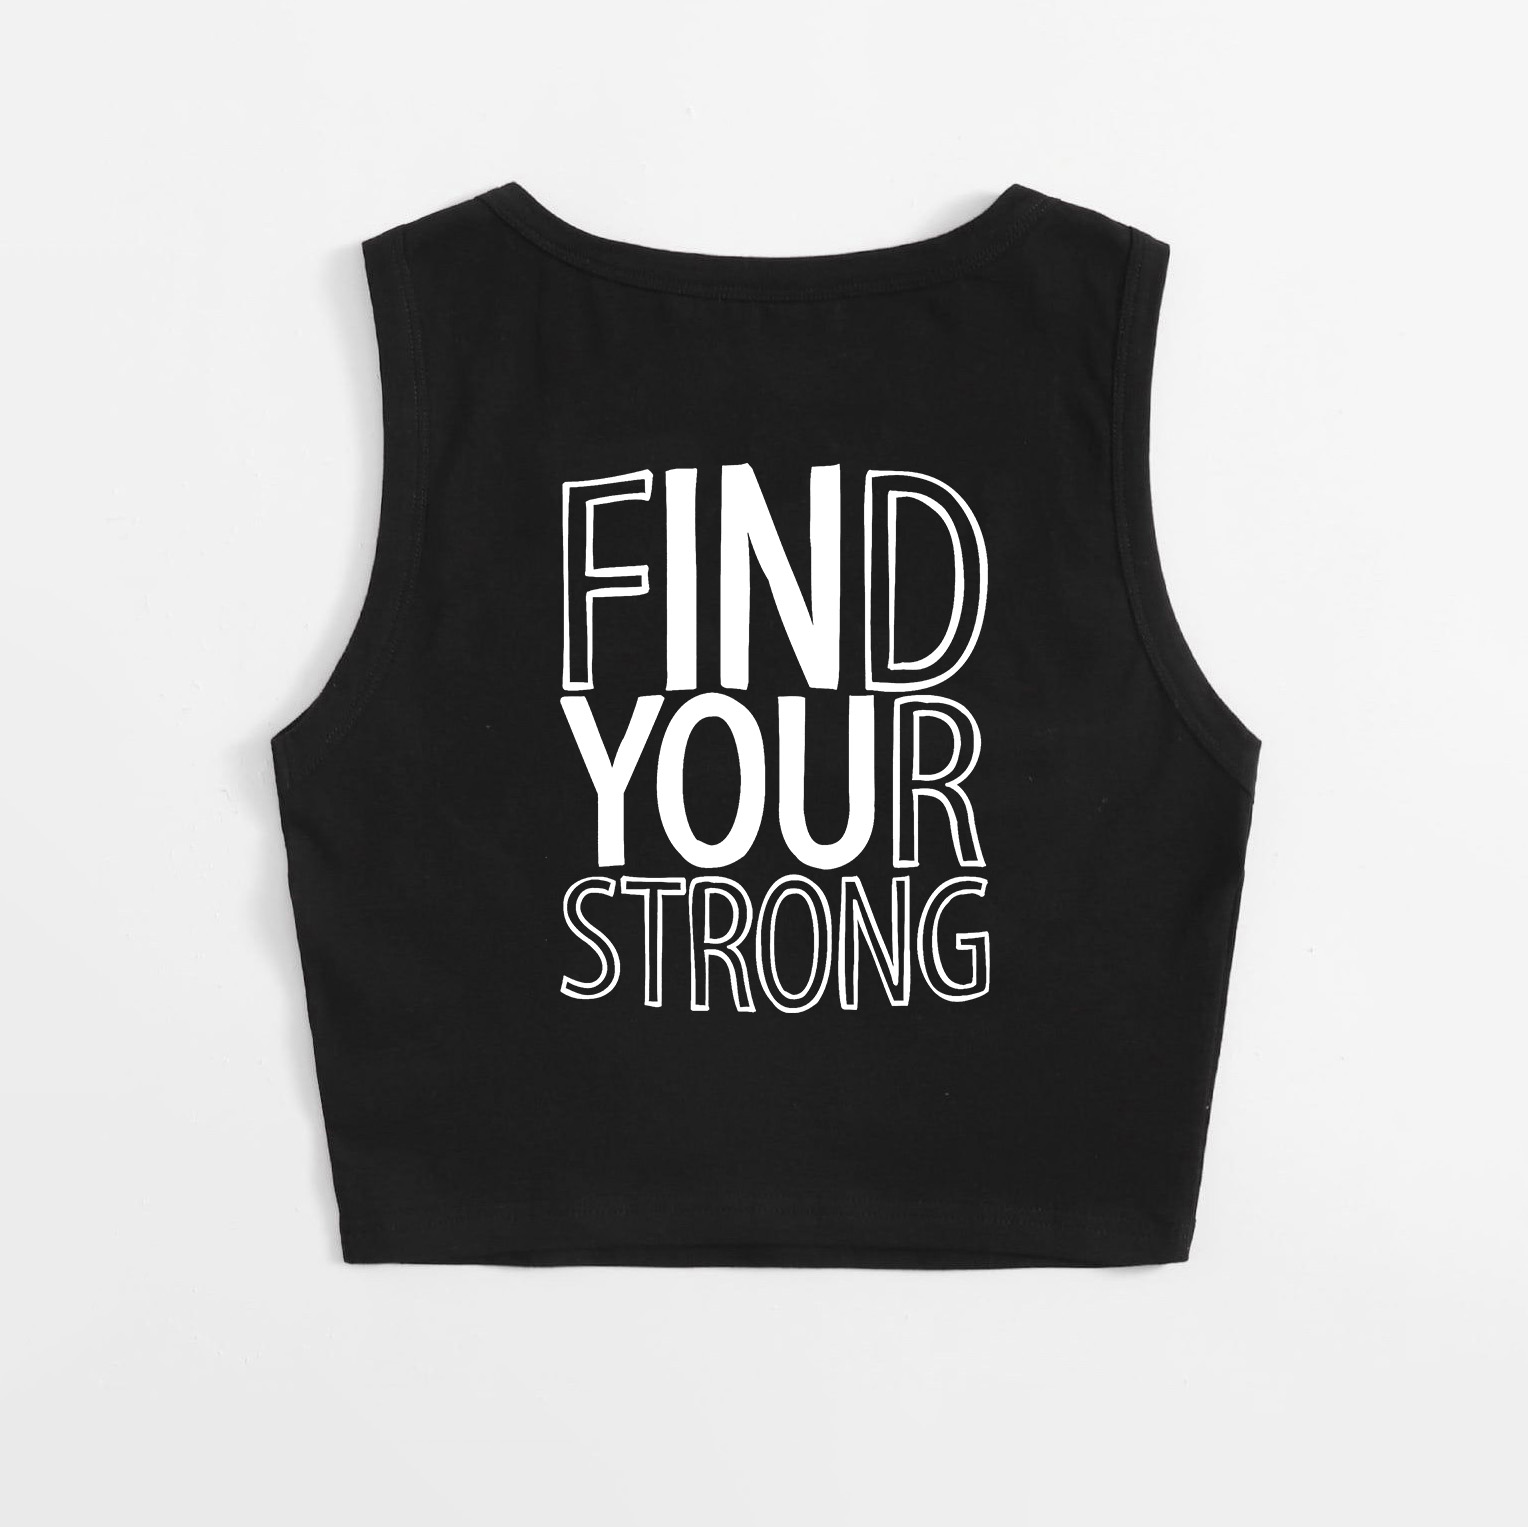 Find Your Strong Printed Women's Crop Top